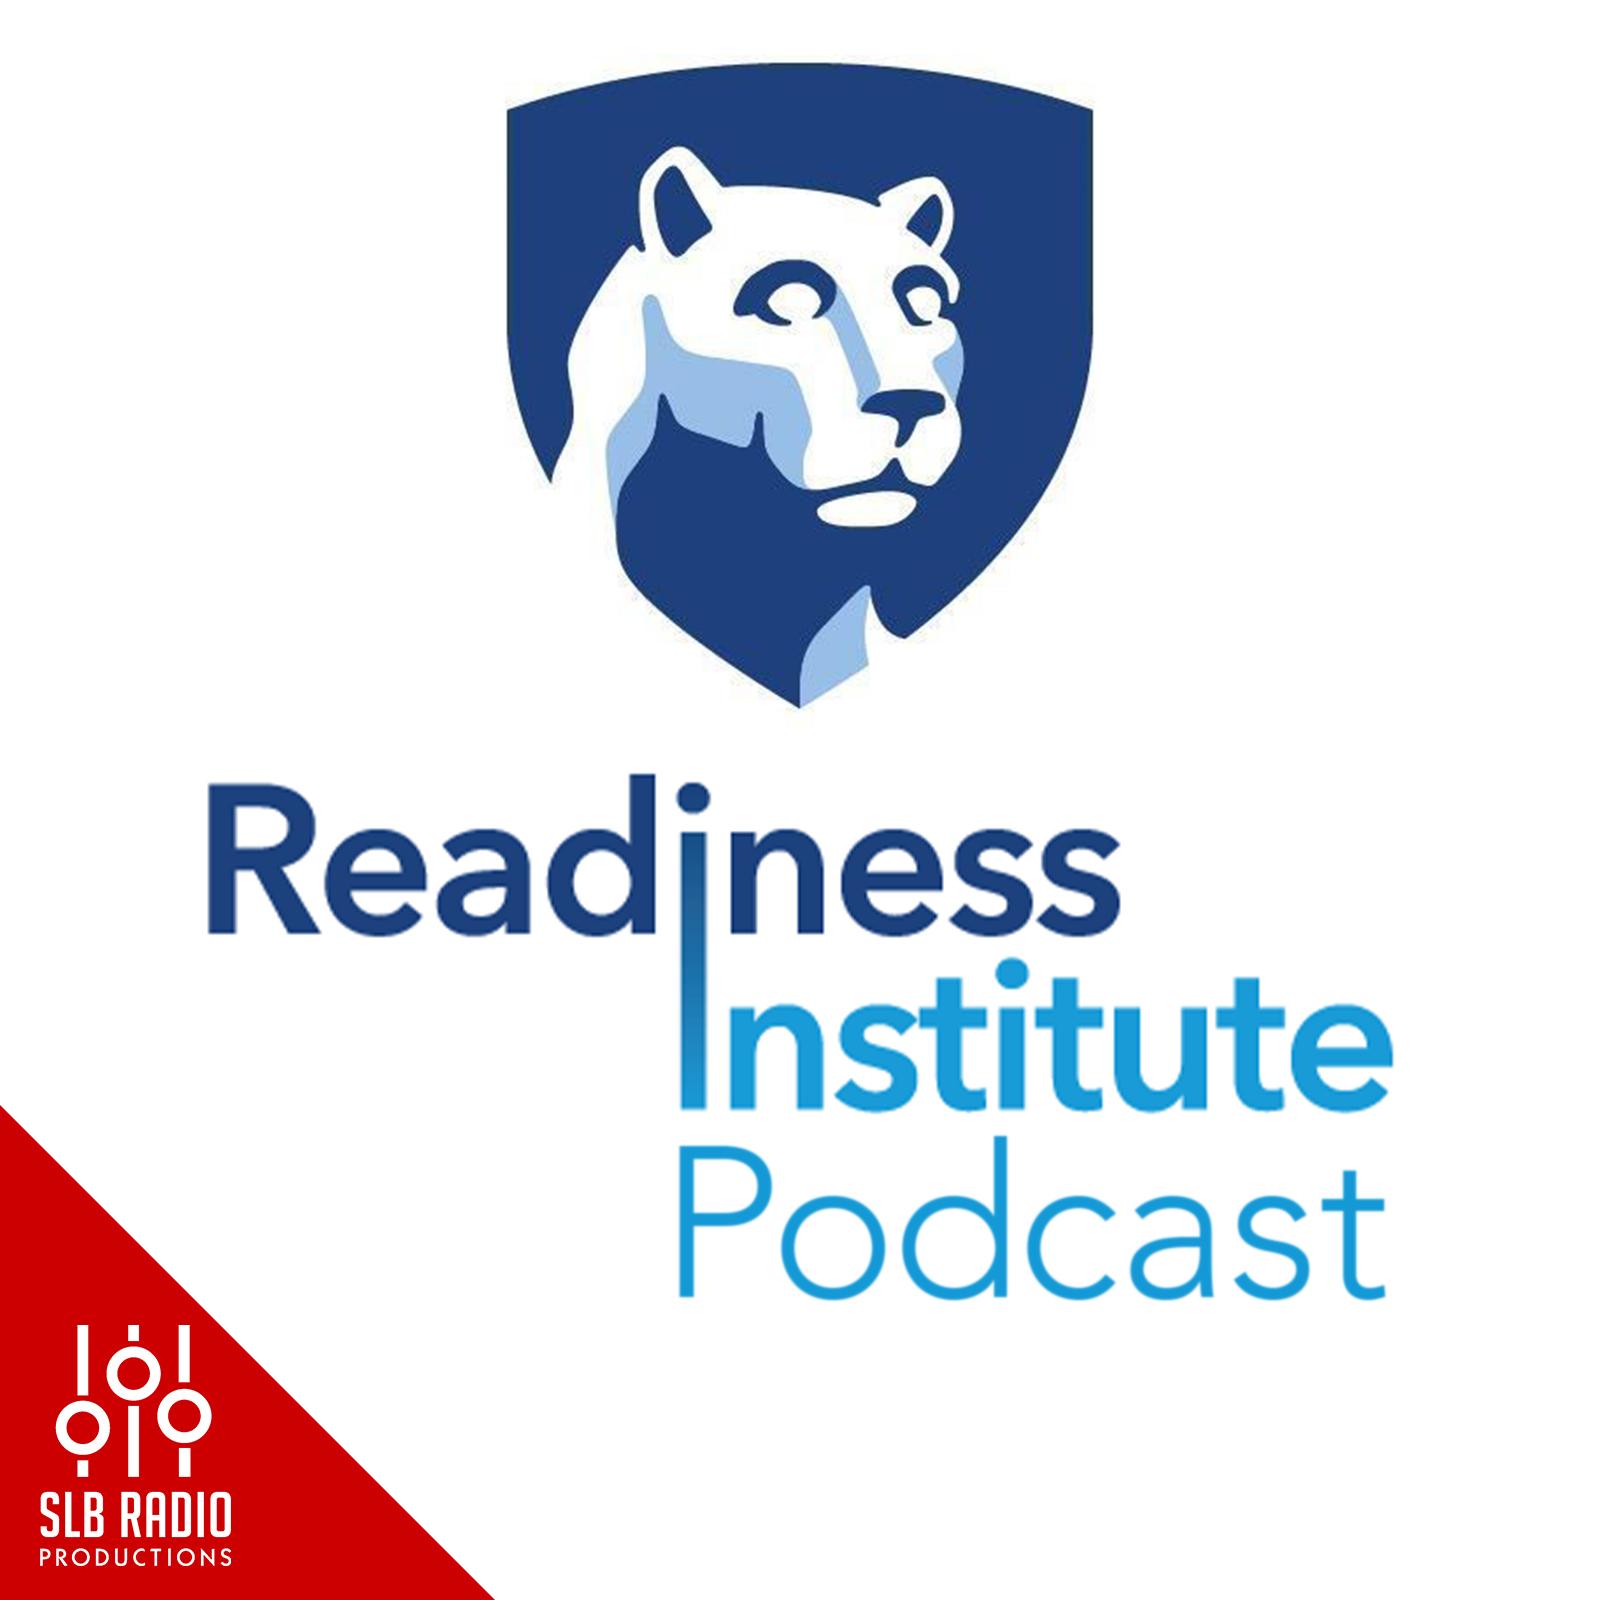 Readiness Institute at Penn State Podcast